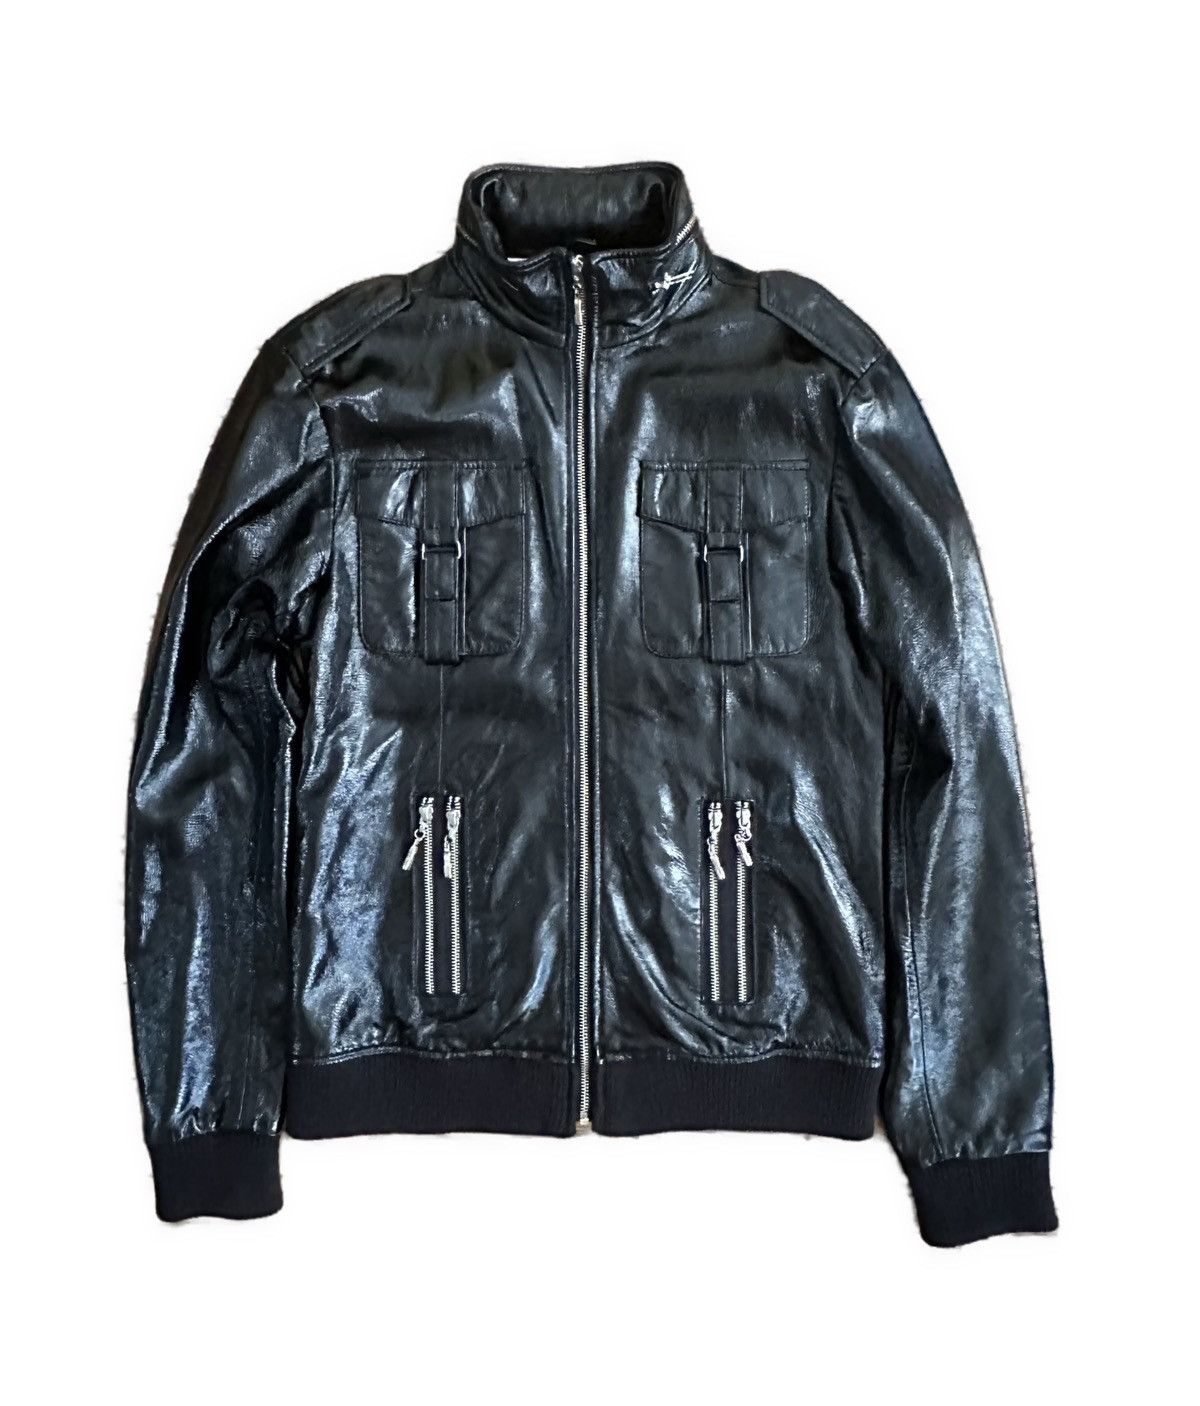 Levi's Damien Hirst X Levi’s X Warhol Factory Leather Jacket | Grailed